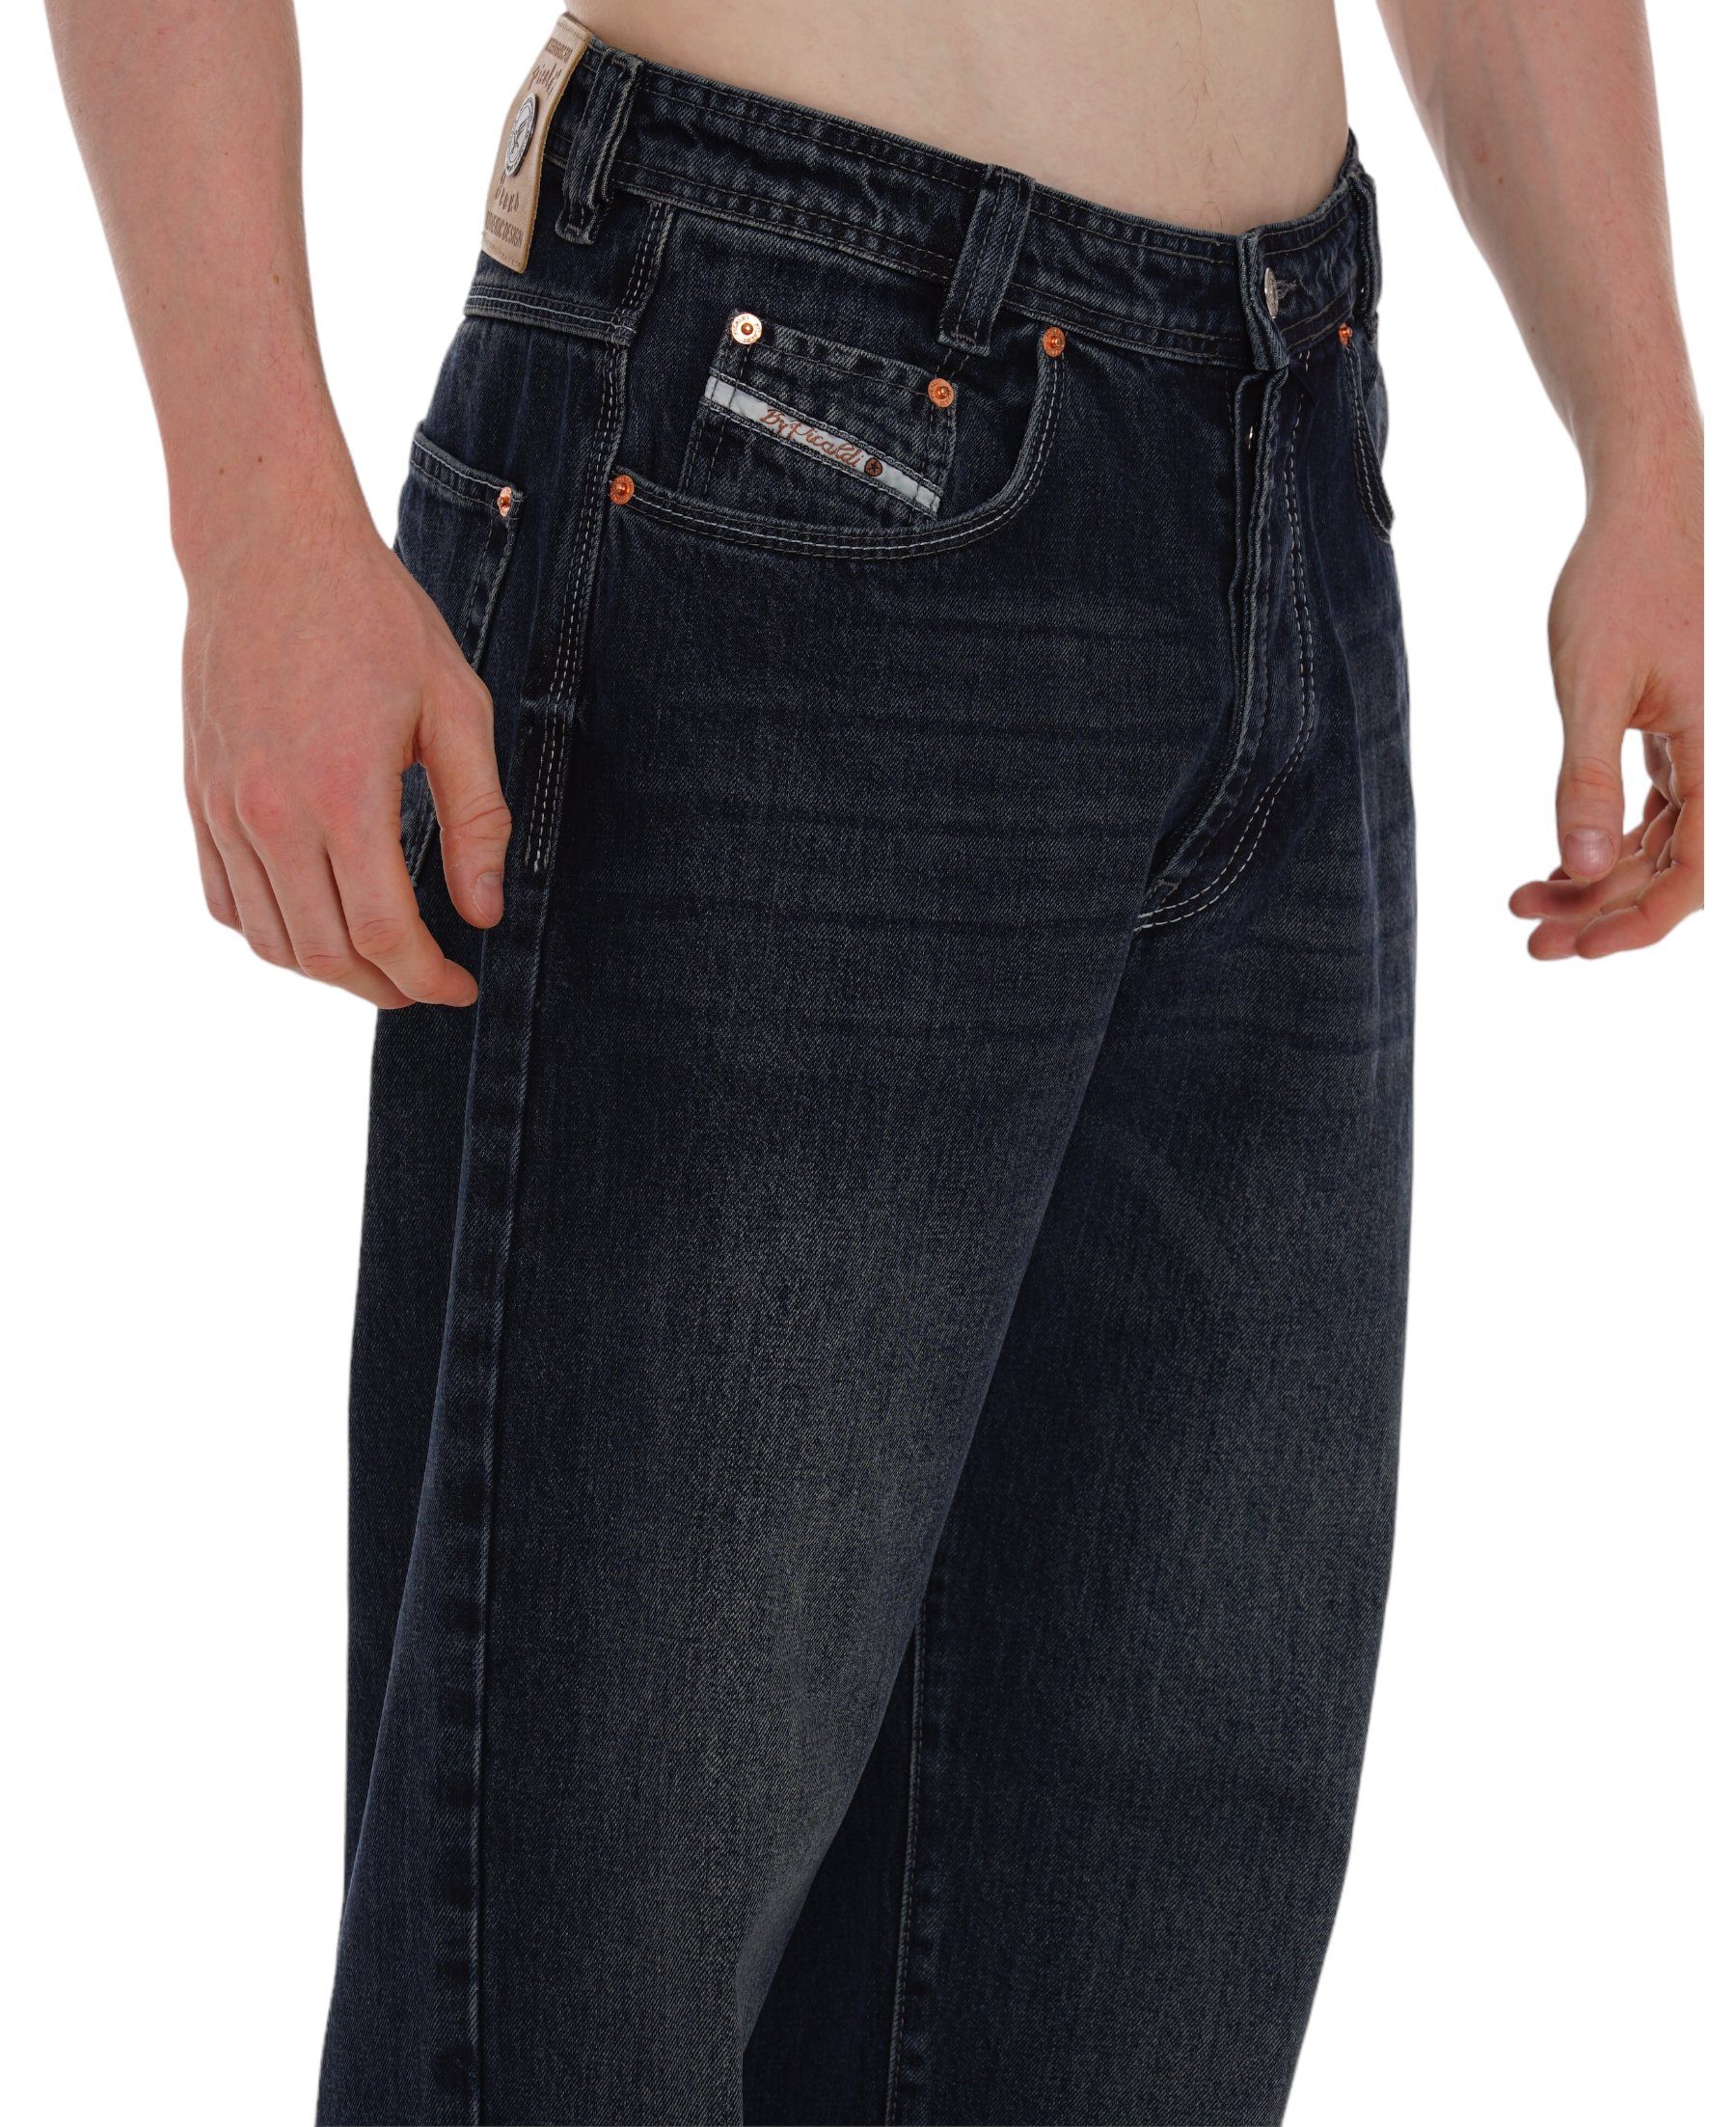 Jeans Pocket Loose Fit, PICALDI Miracle Jeans 471 Zicco Five Weite Jeans